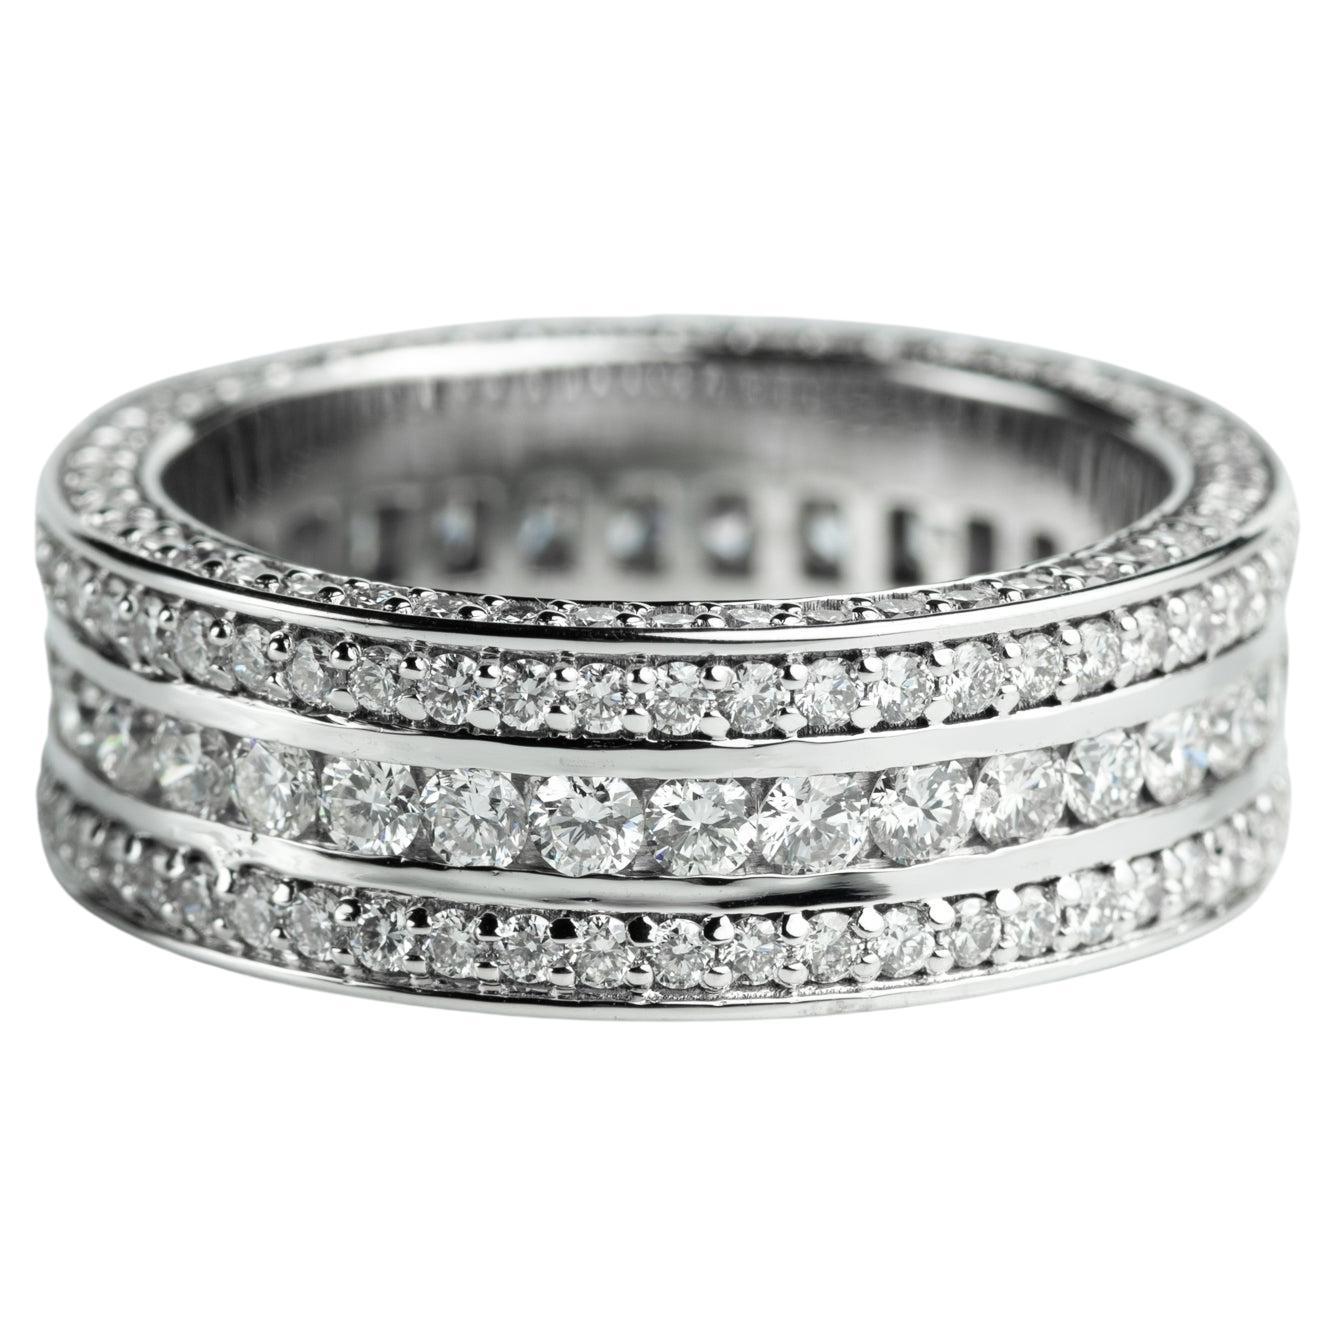 Mens diamond wedding ring in 18k White gold, Iced Out Chunky wedding ring For Sale